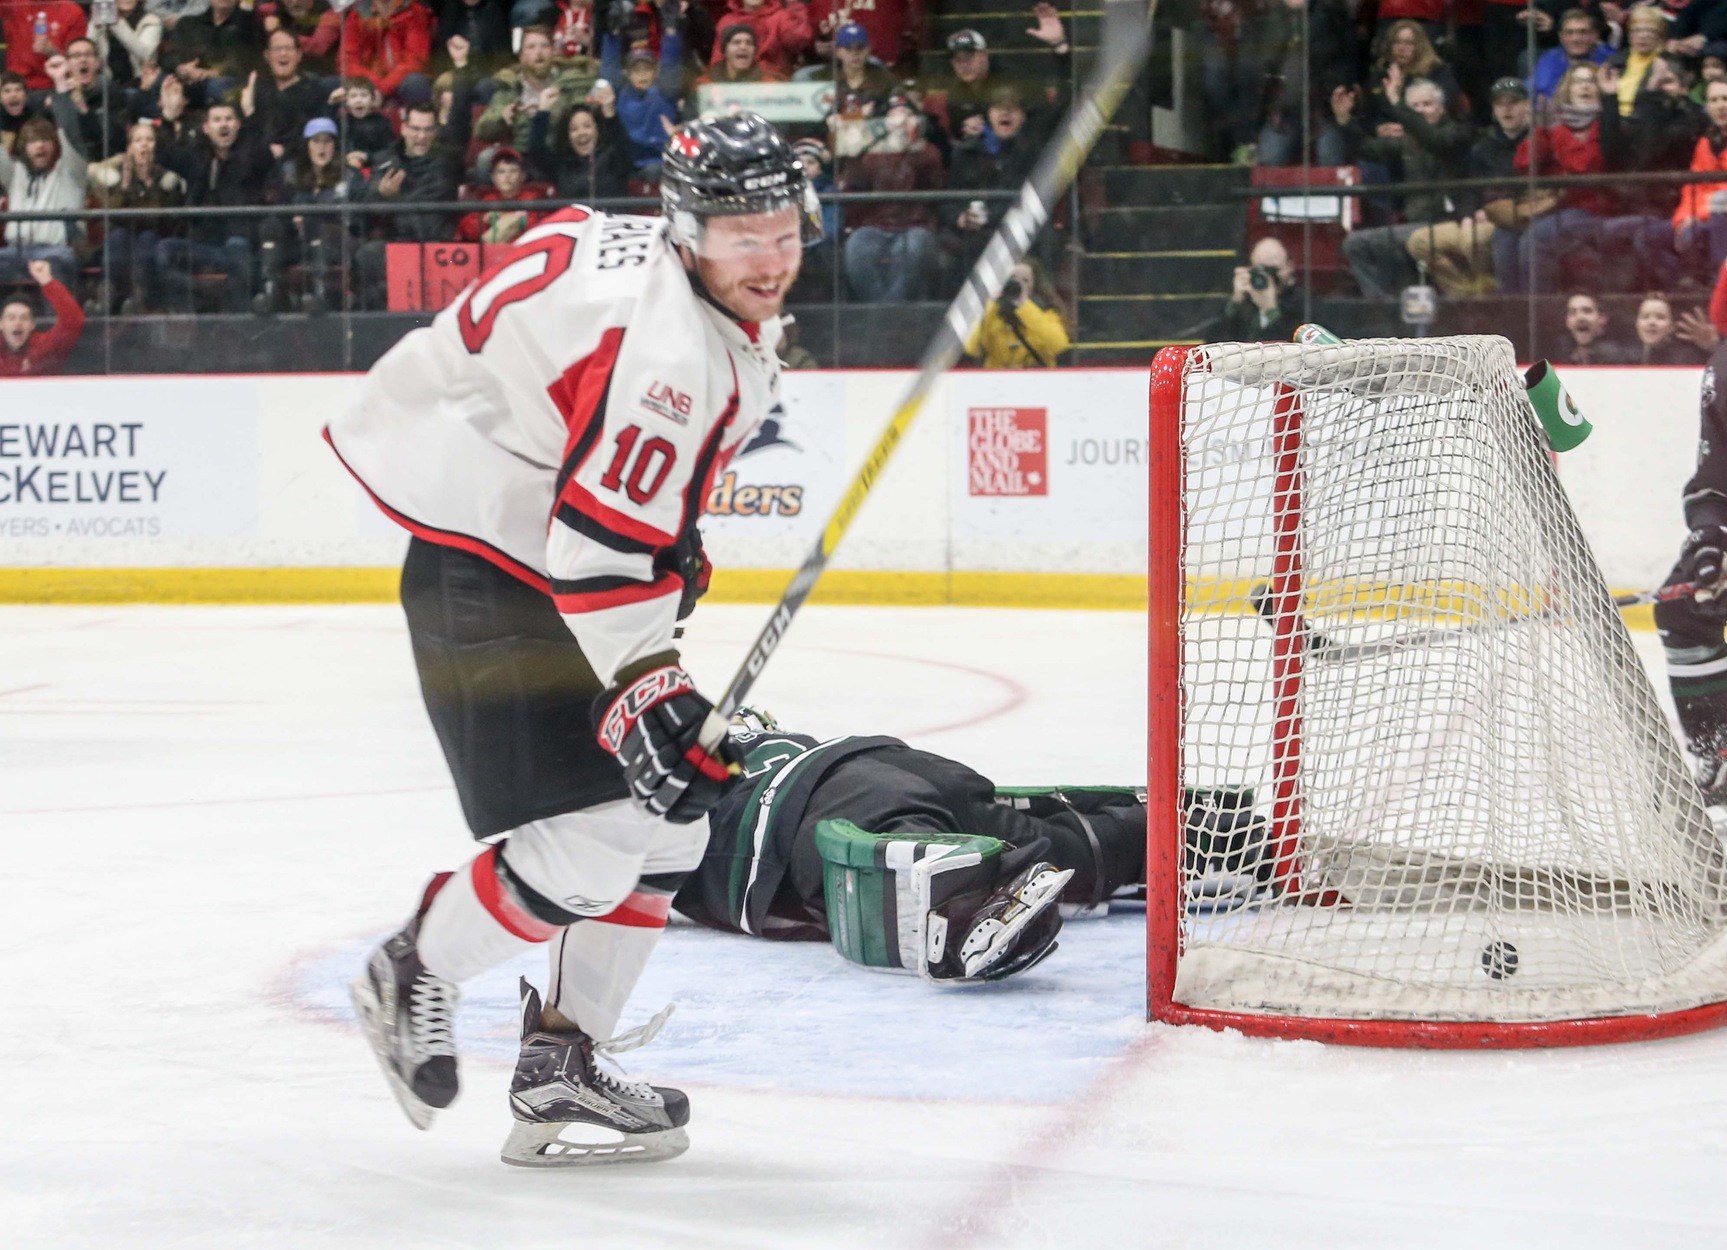 Braes for impact: UNB senior scores four times to make Reds gold again